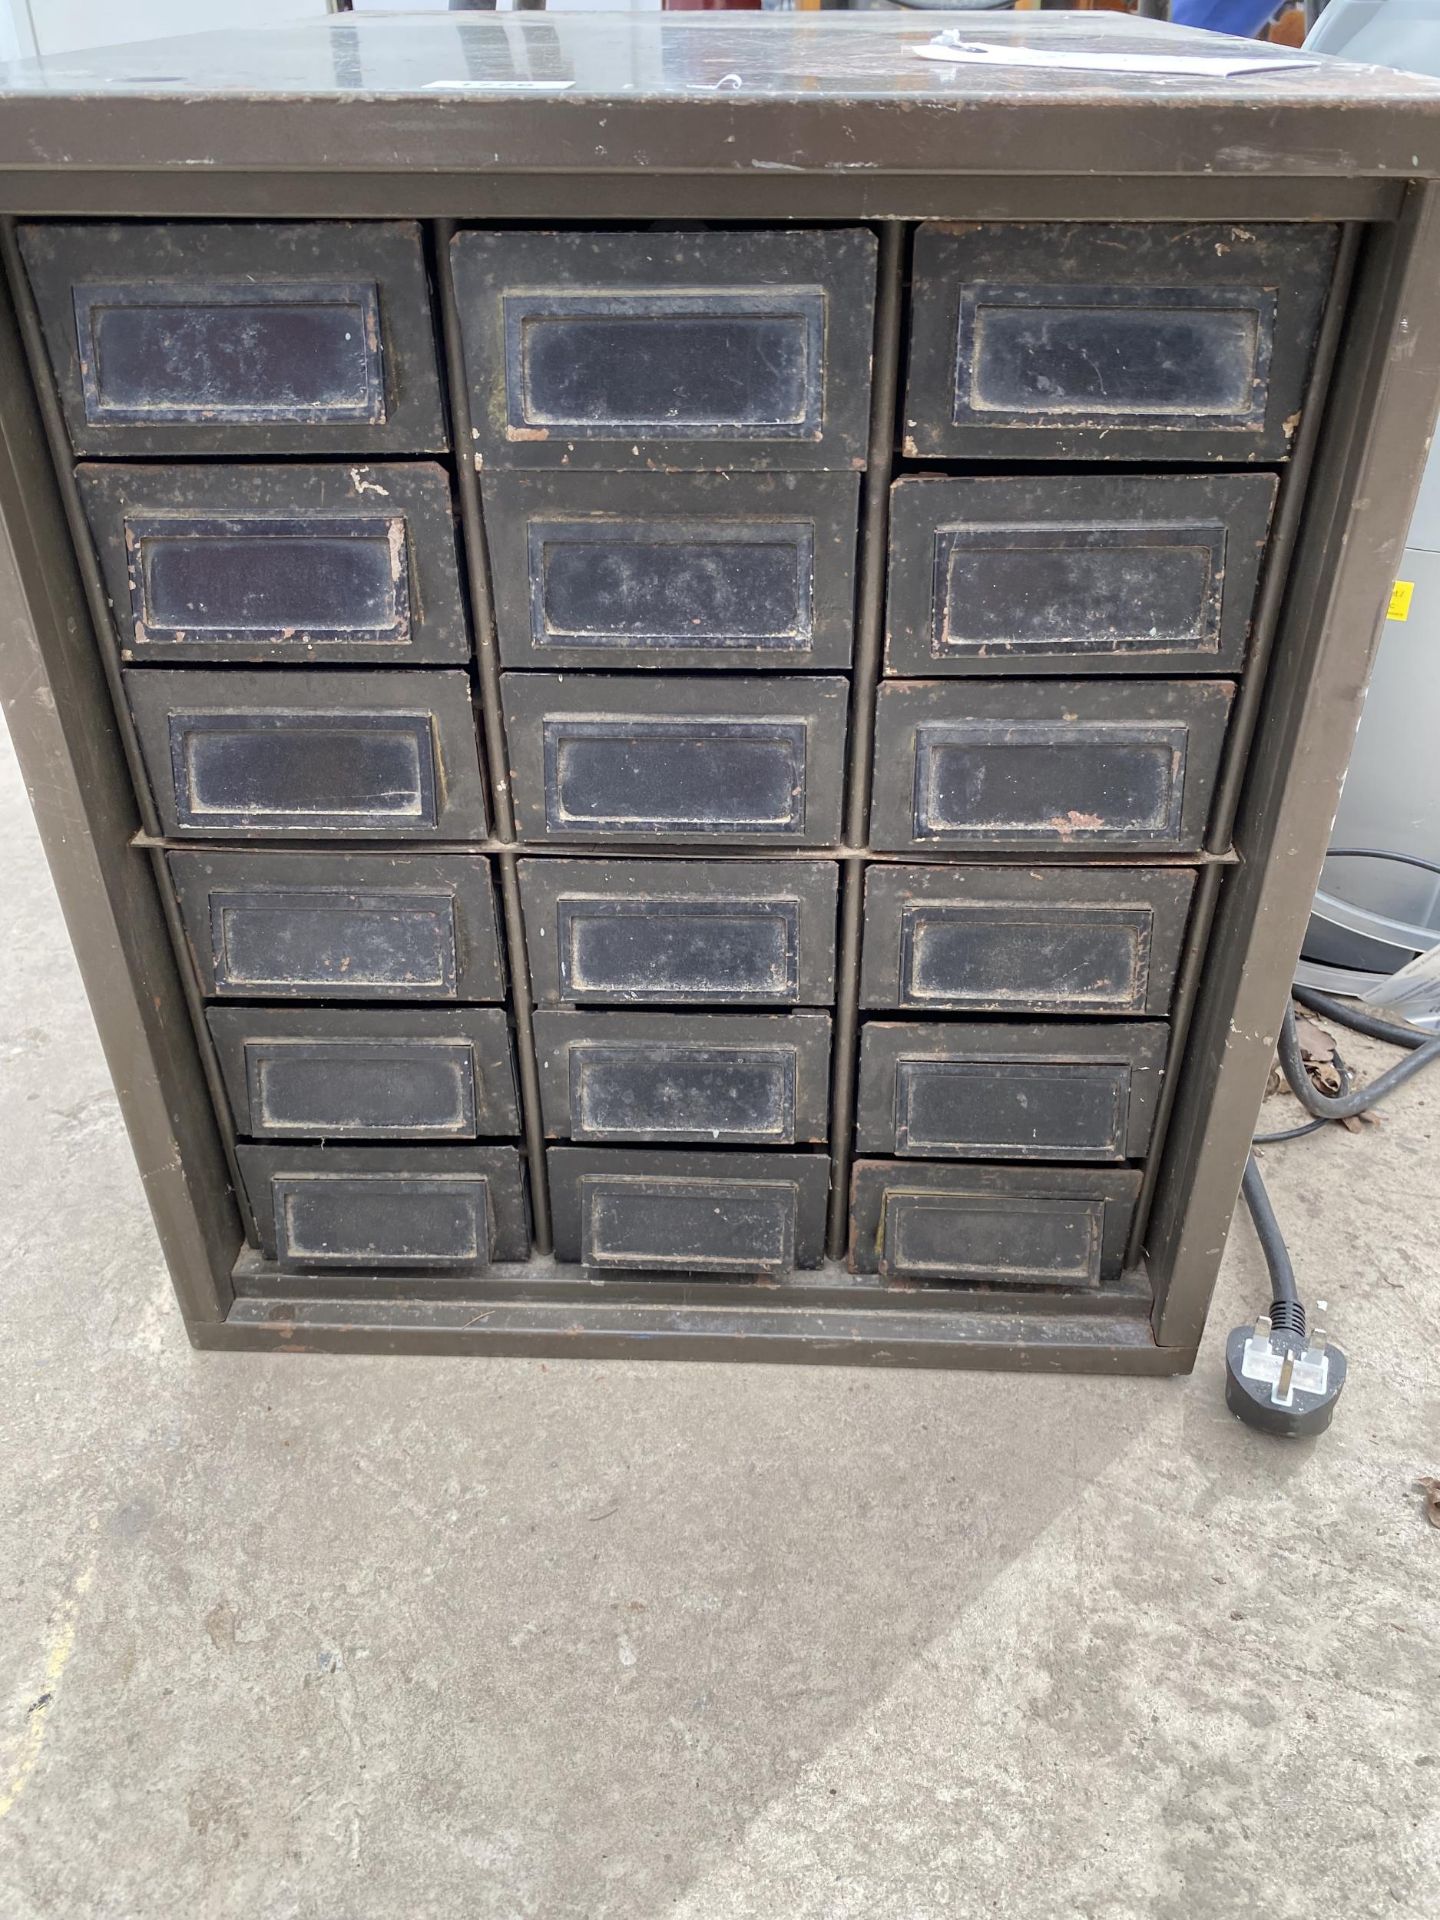 A METAL 18 DRAWER HARDWARE STORAGE CHEST - Image 2 of 3